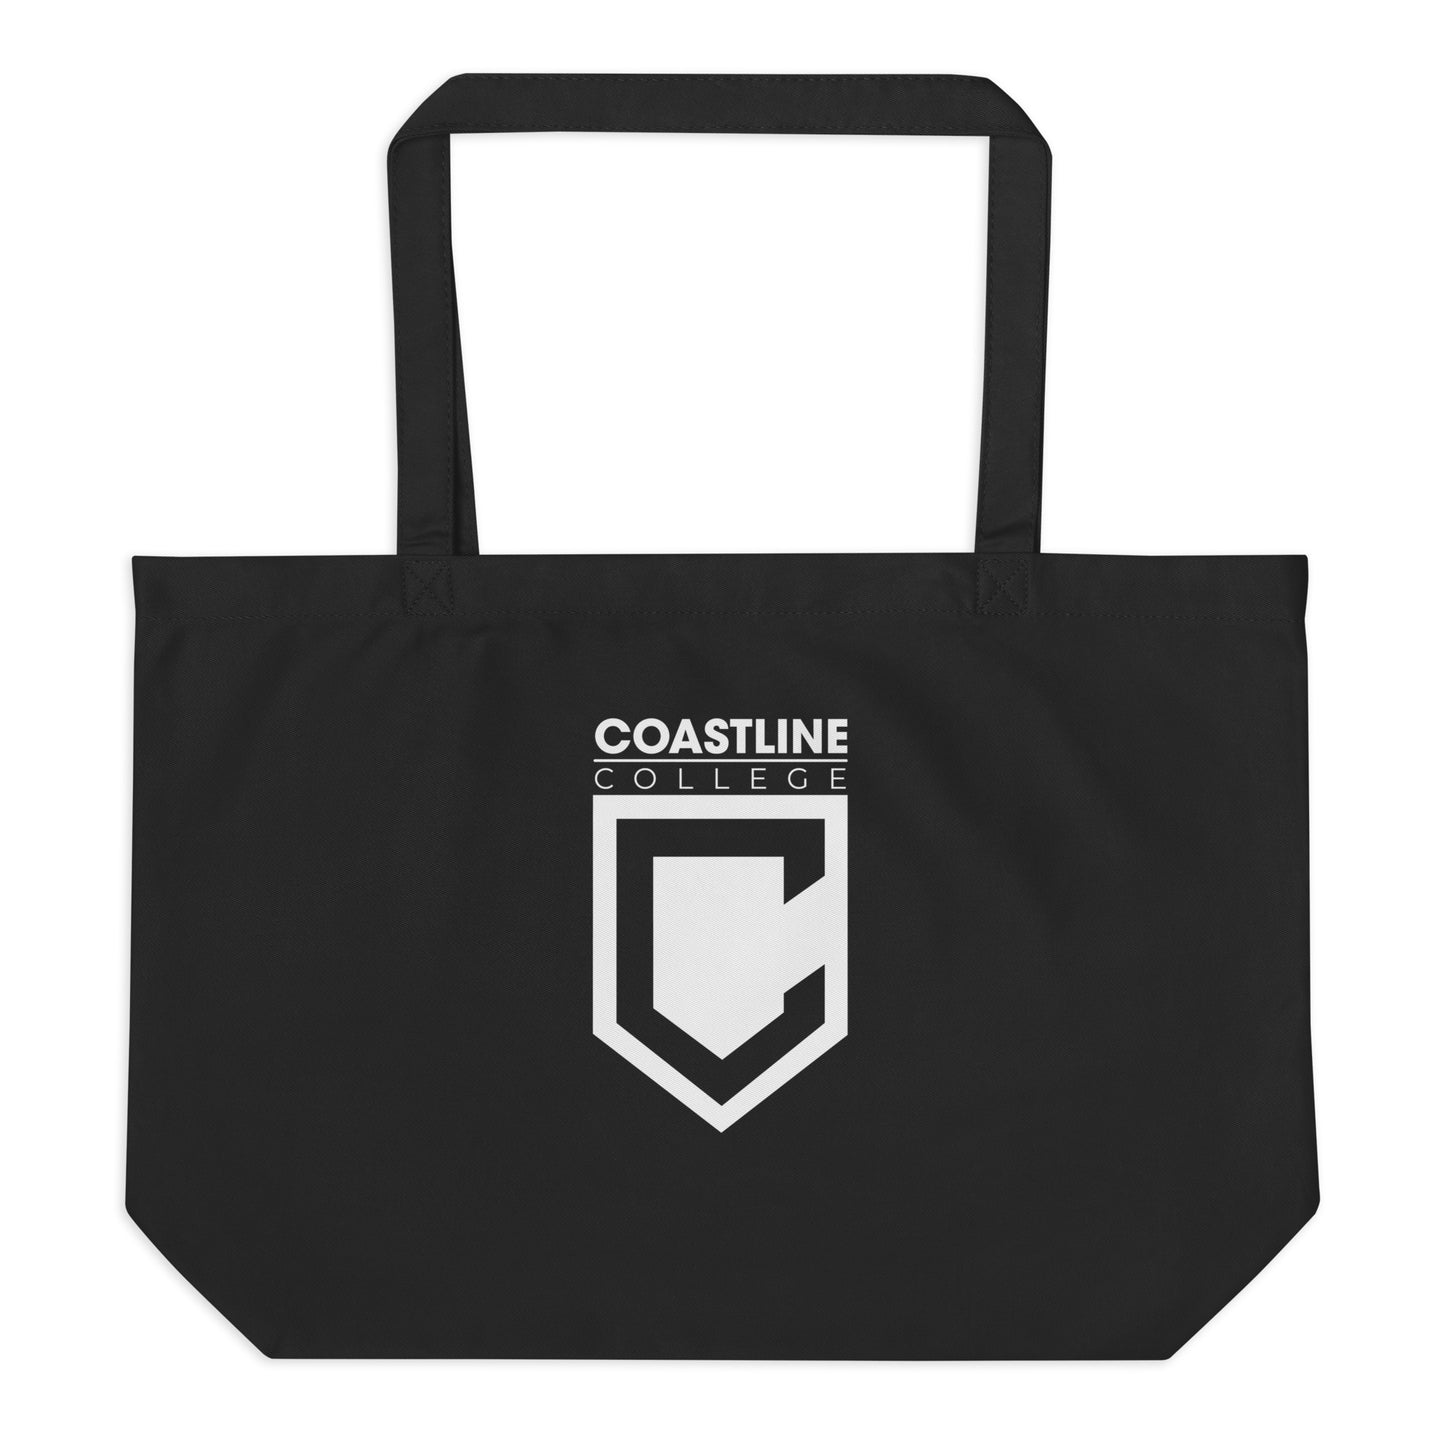 Coastline "Invest In Our Planet" Black Large Organic Tote Bag